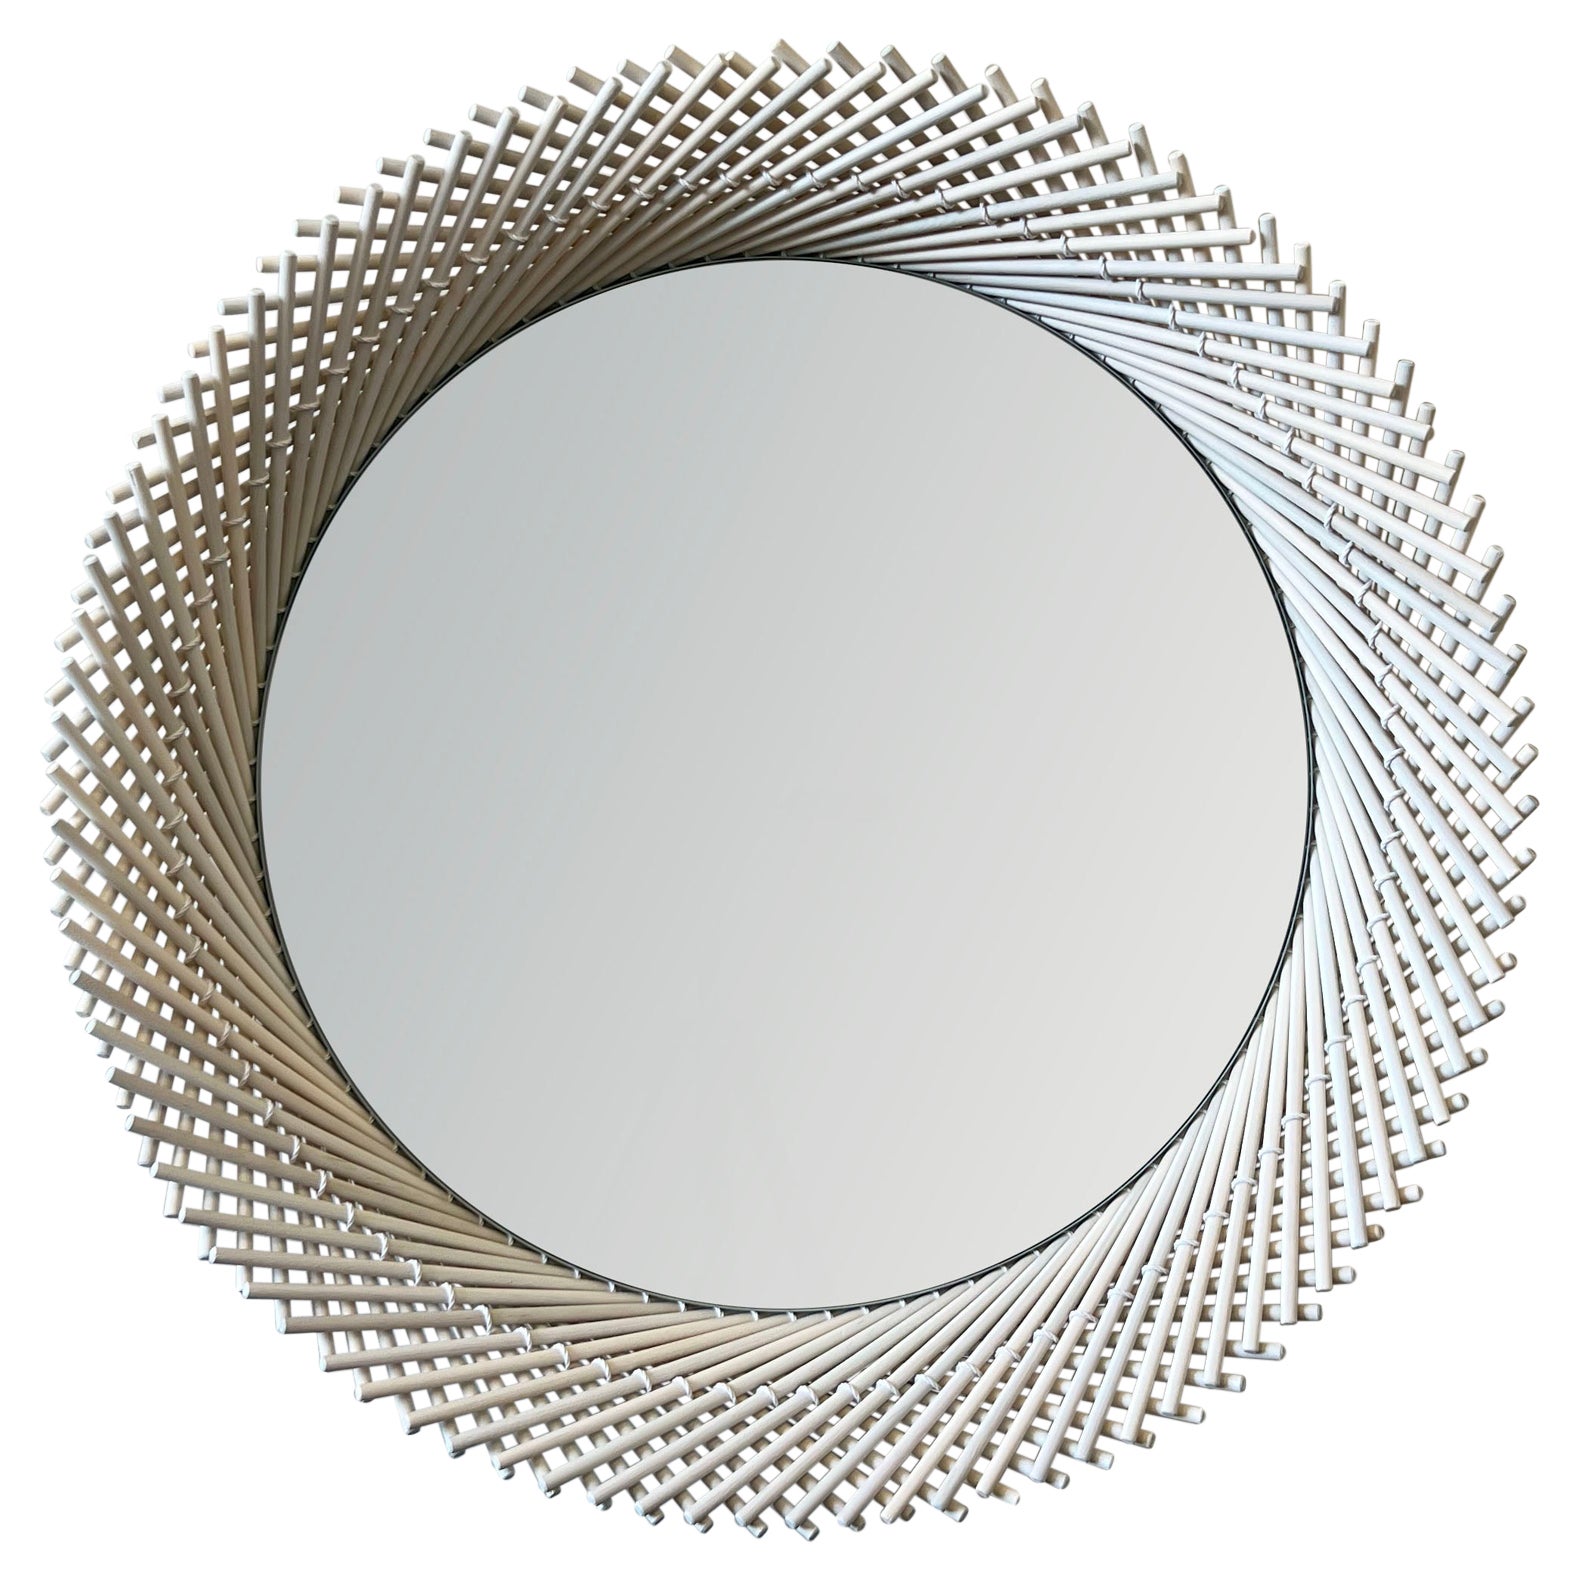 Mooda Mirror Round 18 / Bleached Maple Wood, Clear Mirror by INDO- For Sale